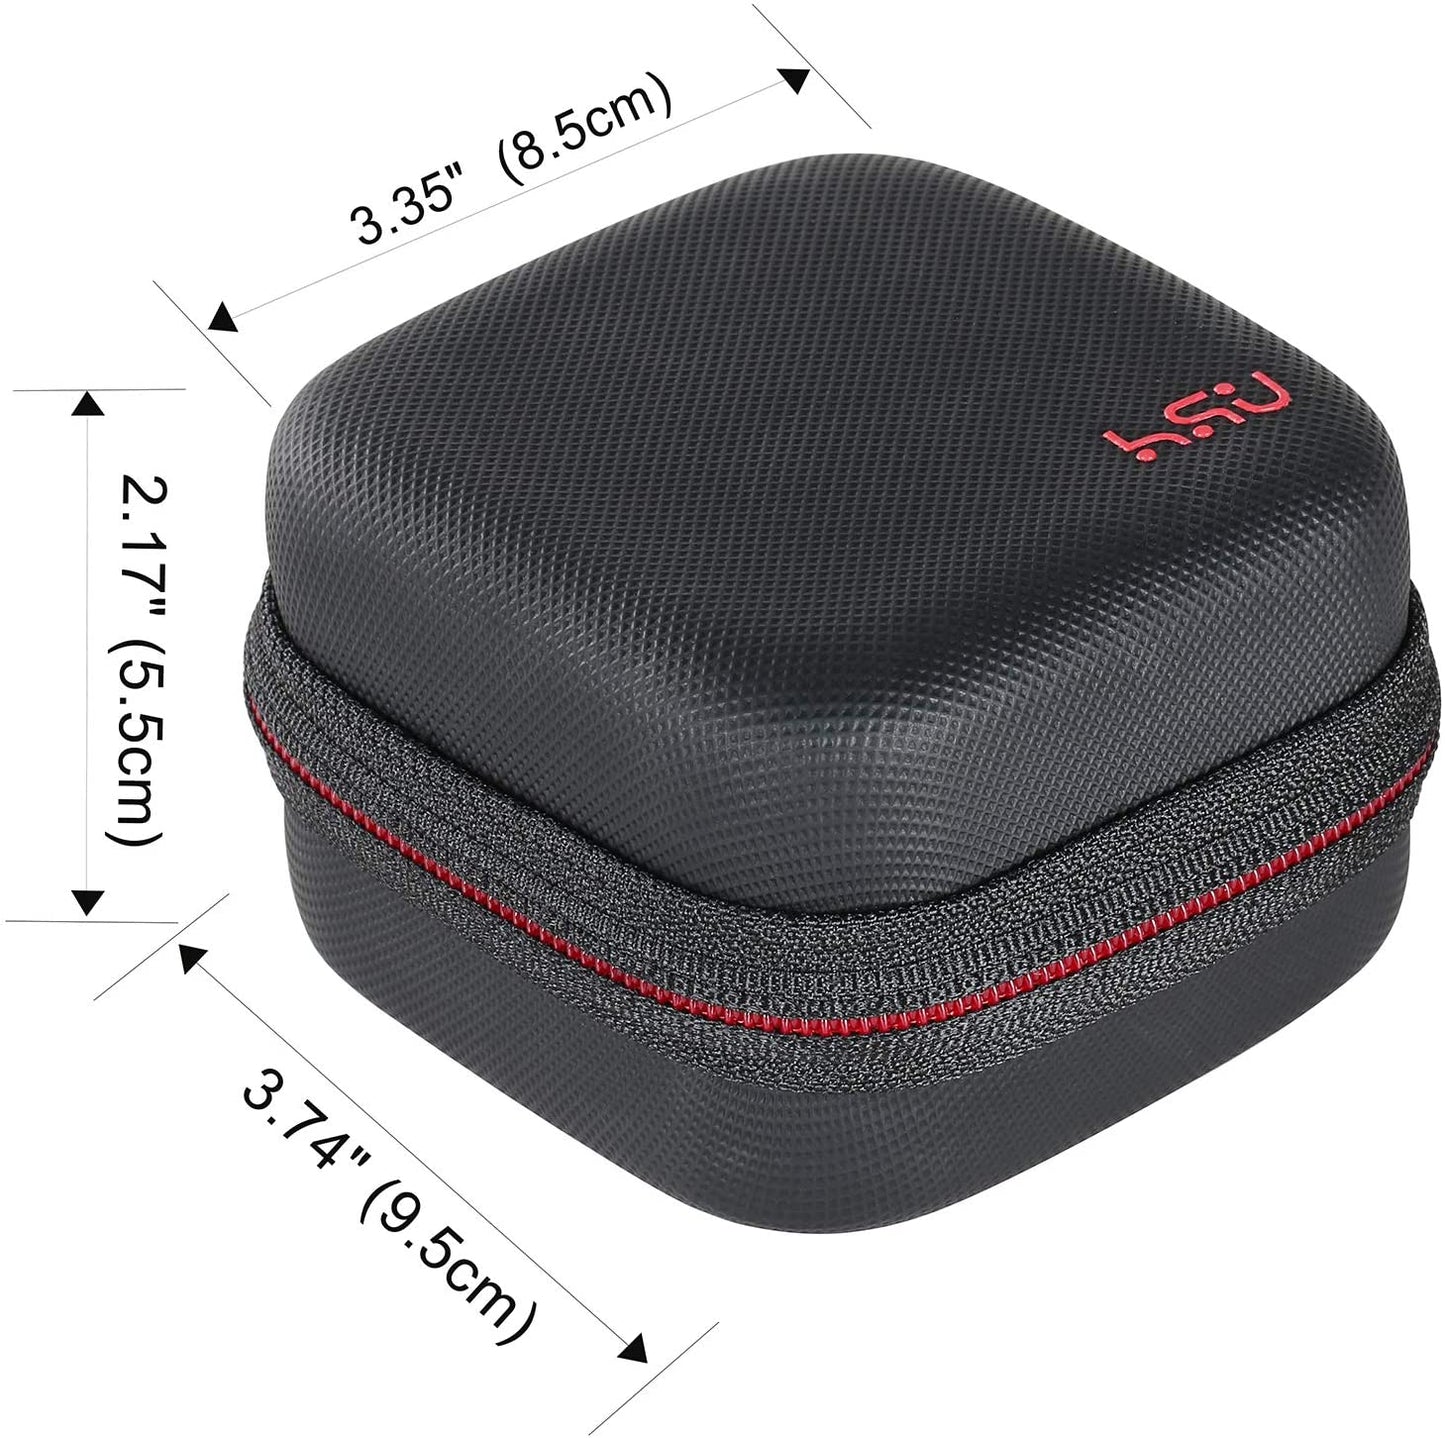 HSU Mini Carrying Case Compatible with GoPro Max Camera, Hard Shell Protective Case Travel Portable Storage Bag Fits with Selfie Stick Pole Monopod Accessories